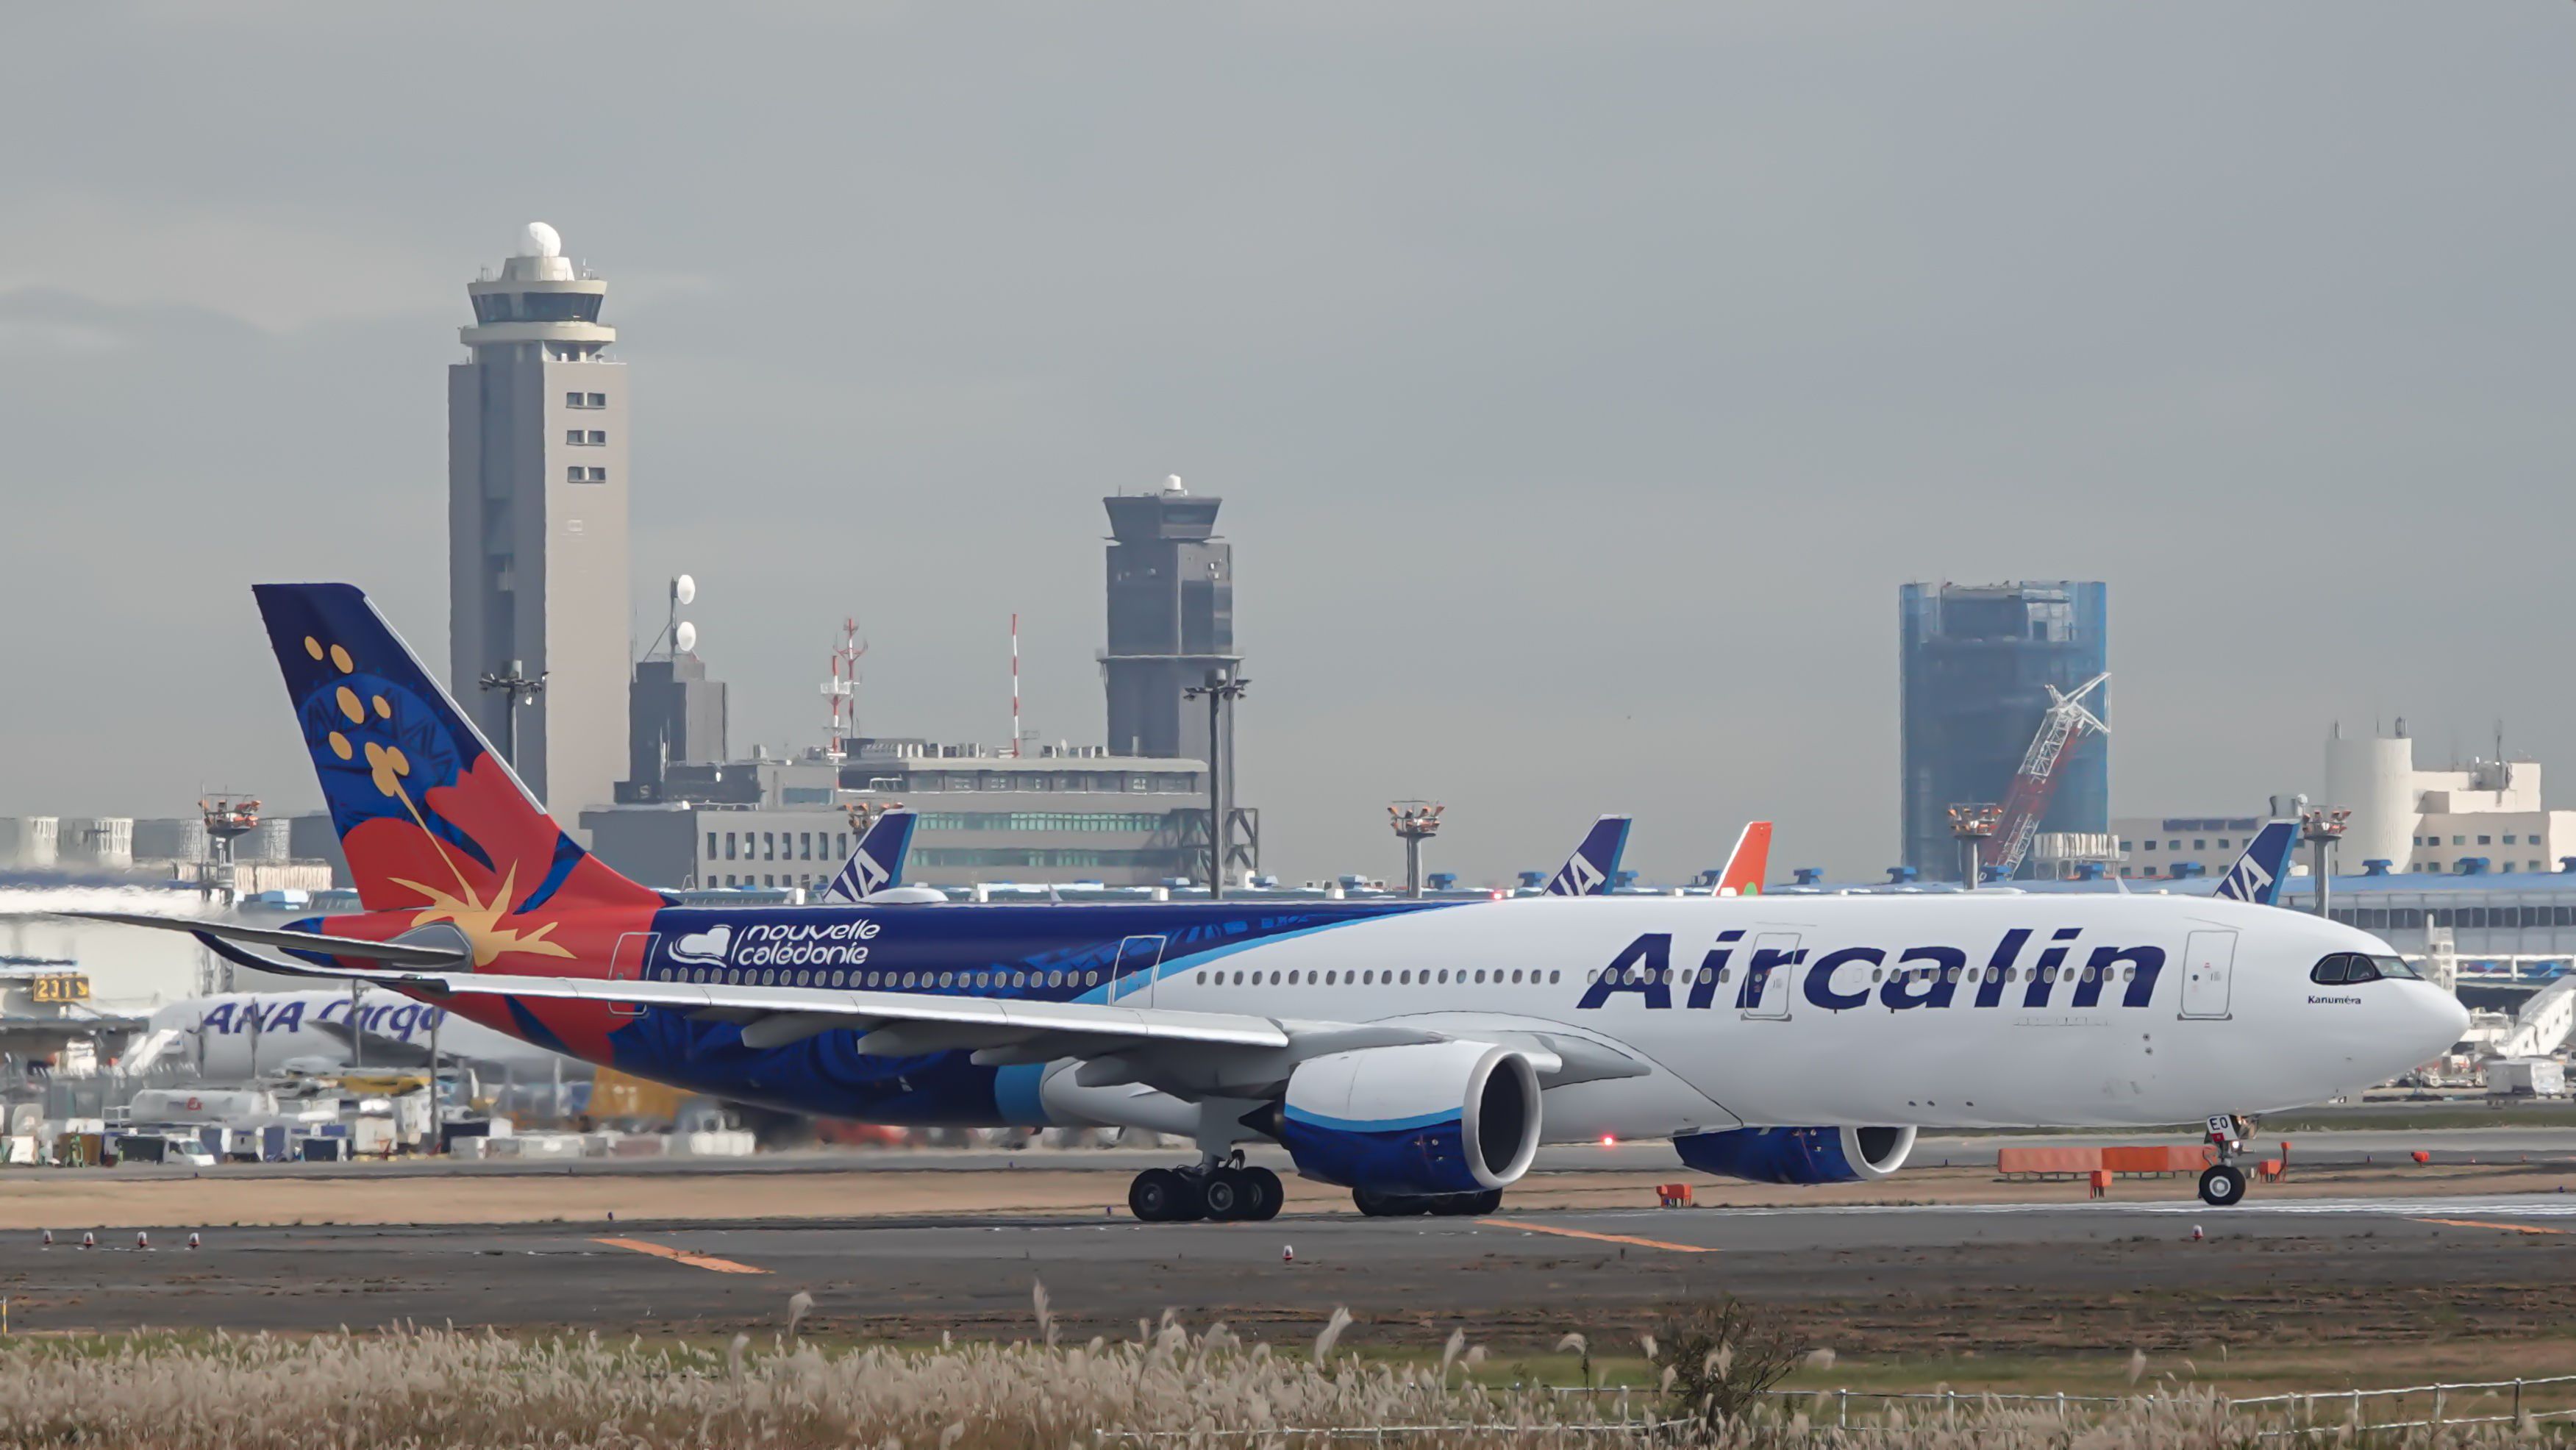 An Aircalin Airbus A330neo, registration F-ONEO, on the taxiway.